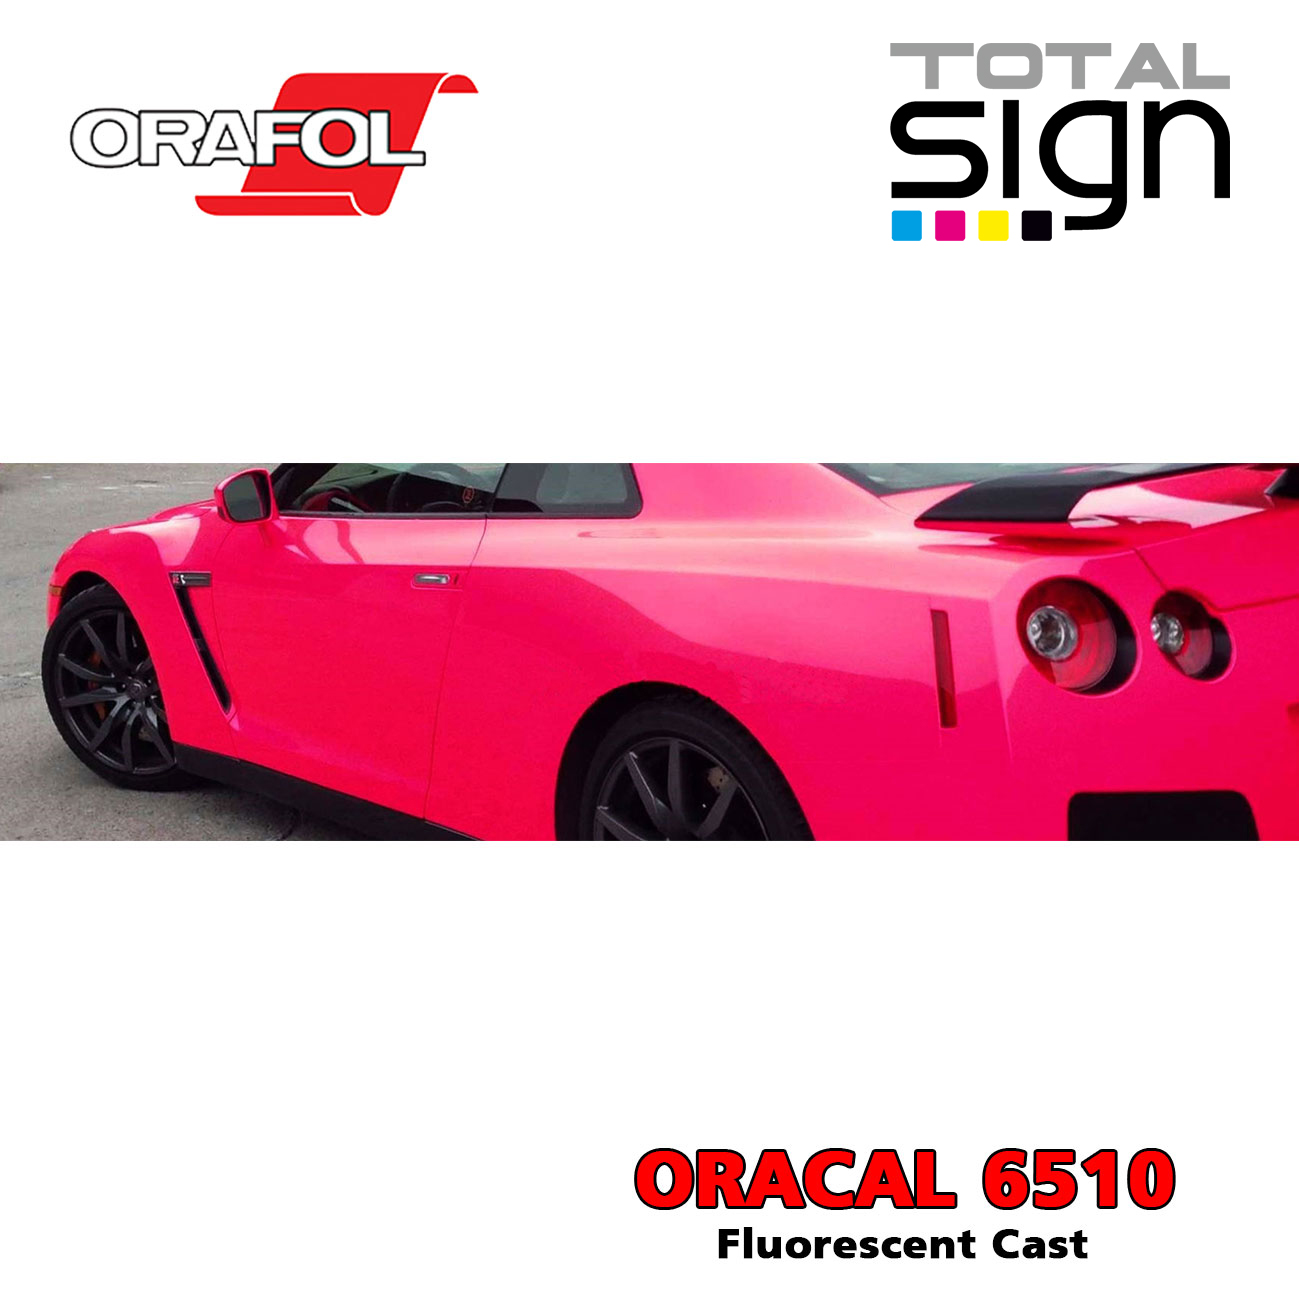 ORACAL 6510 Fluorescent Cast – Total Sign